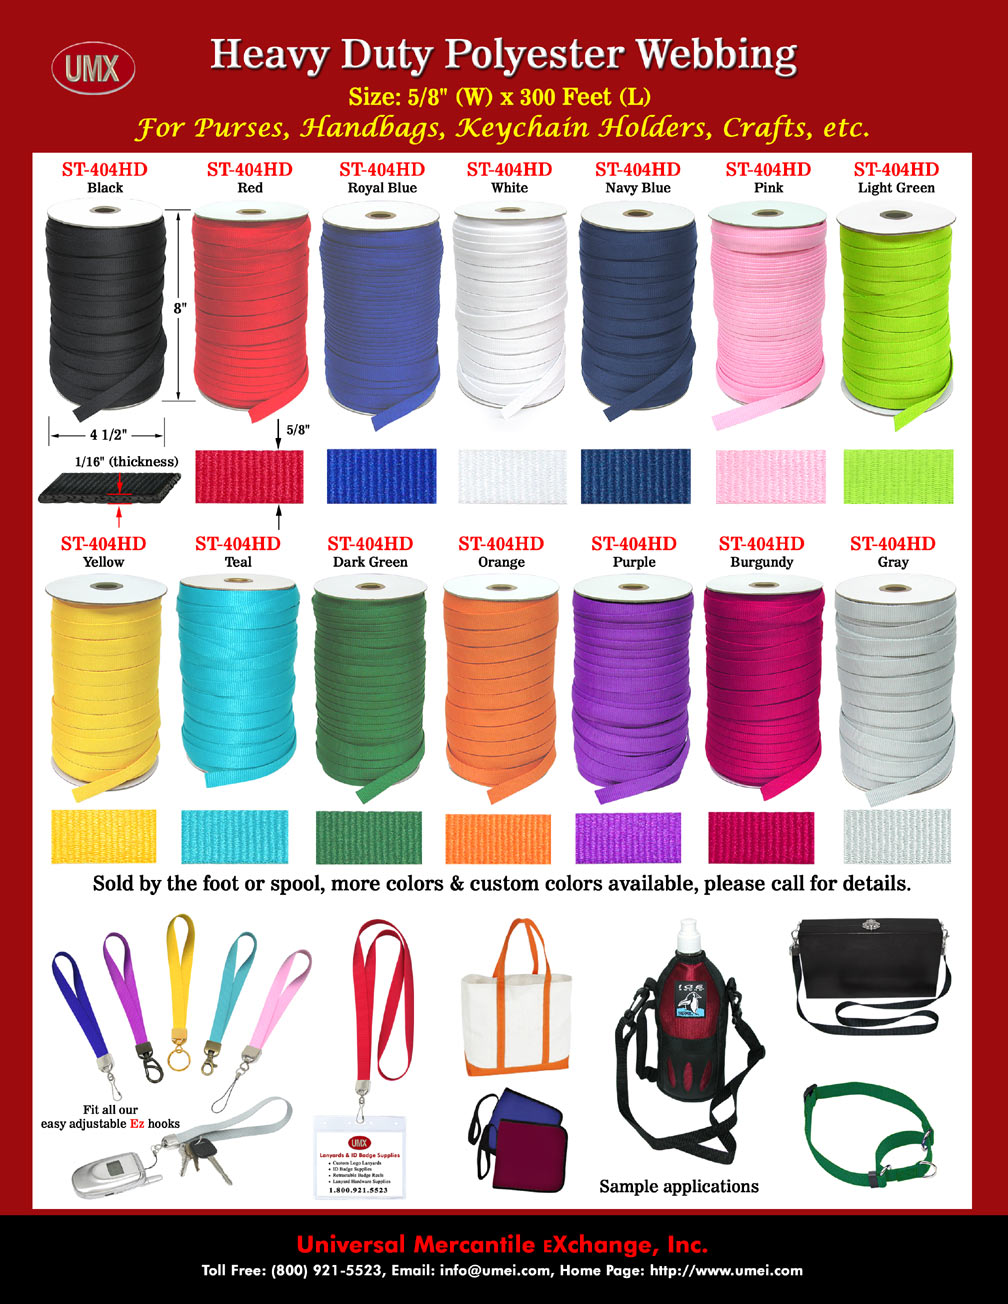 5/8" plain color purse or handbag straps, we stock black, royal blue, red, navy blue, white, yellow, orange, grey, burgundy, pink, dark green, light green, purple and teal colors in our warehouse.